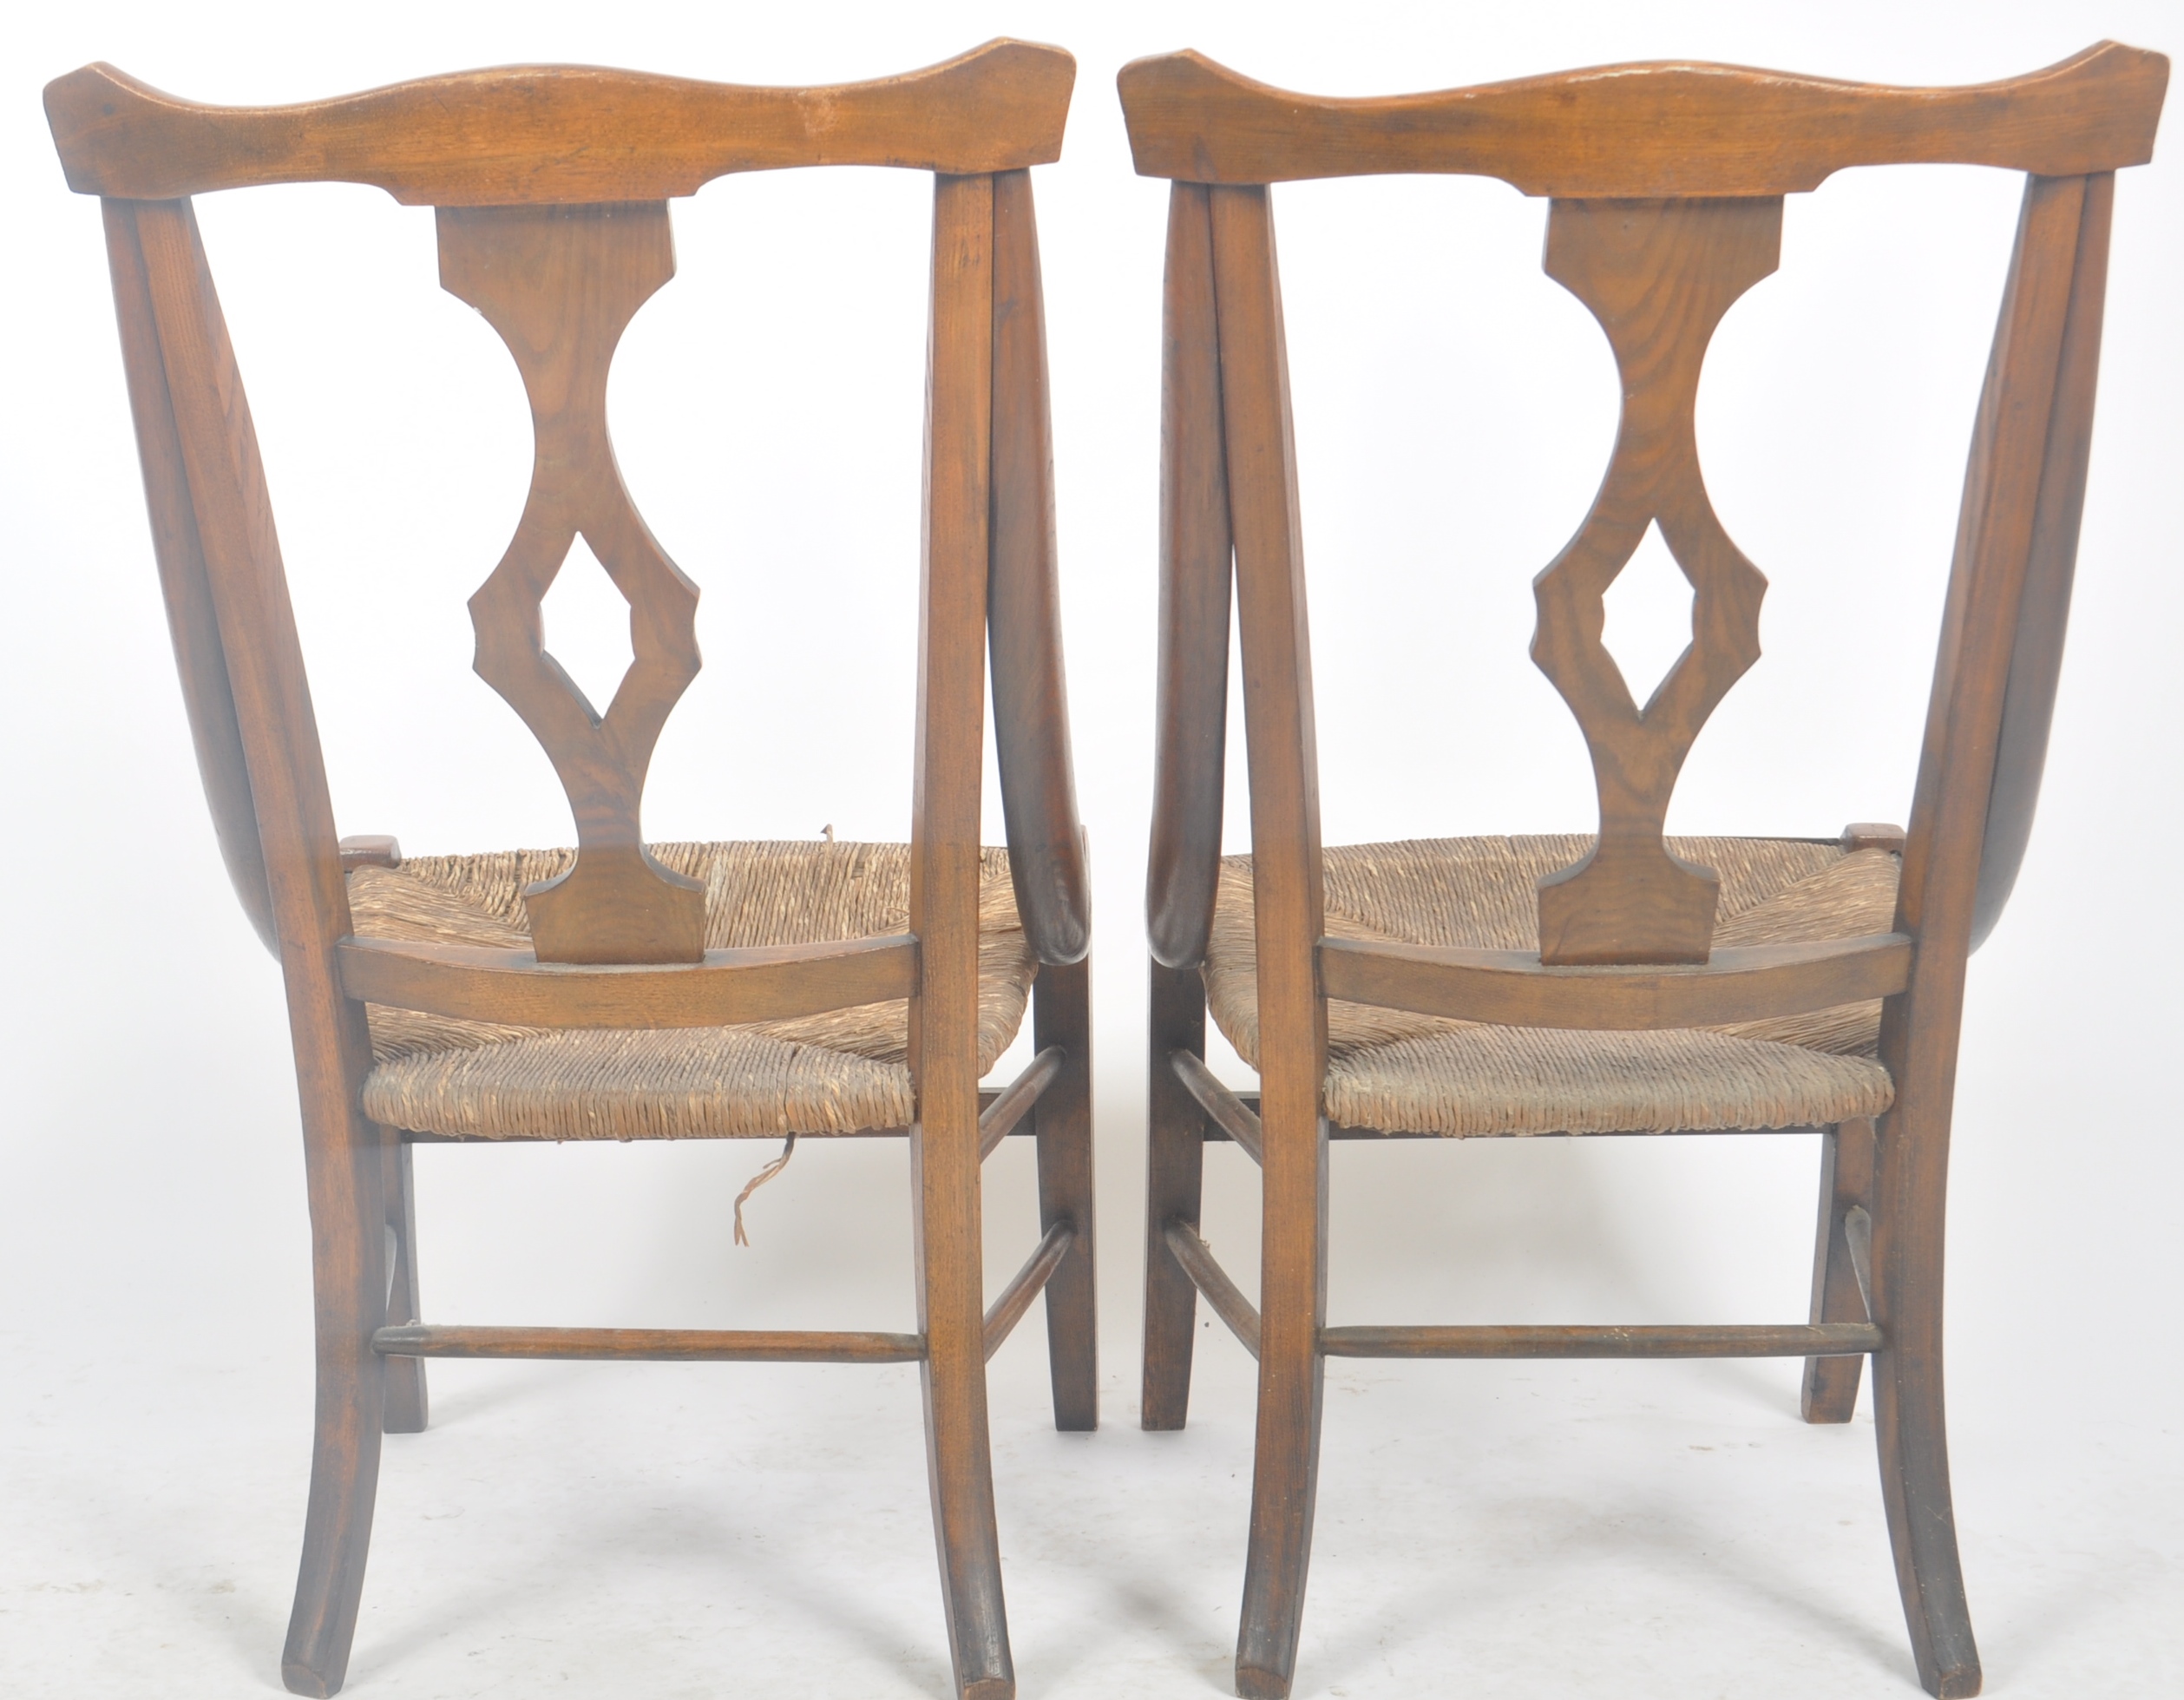 MATCHING PAIR OF ARTS & CRAFTS OAK AND RUSH SEAT CHAIRS - Image 5 of 6